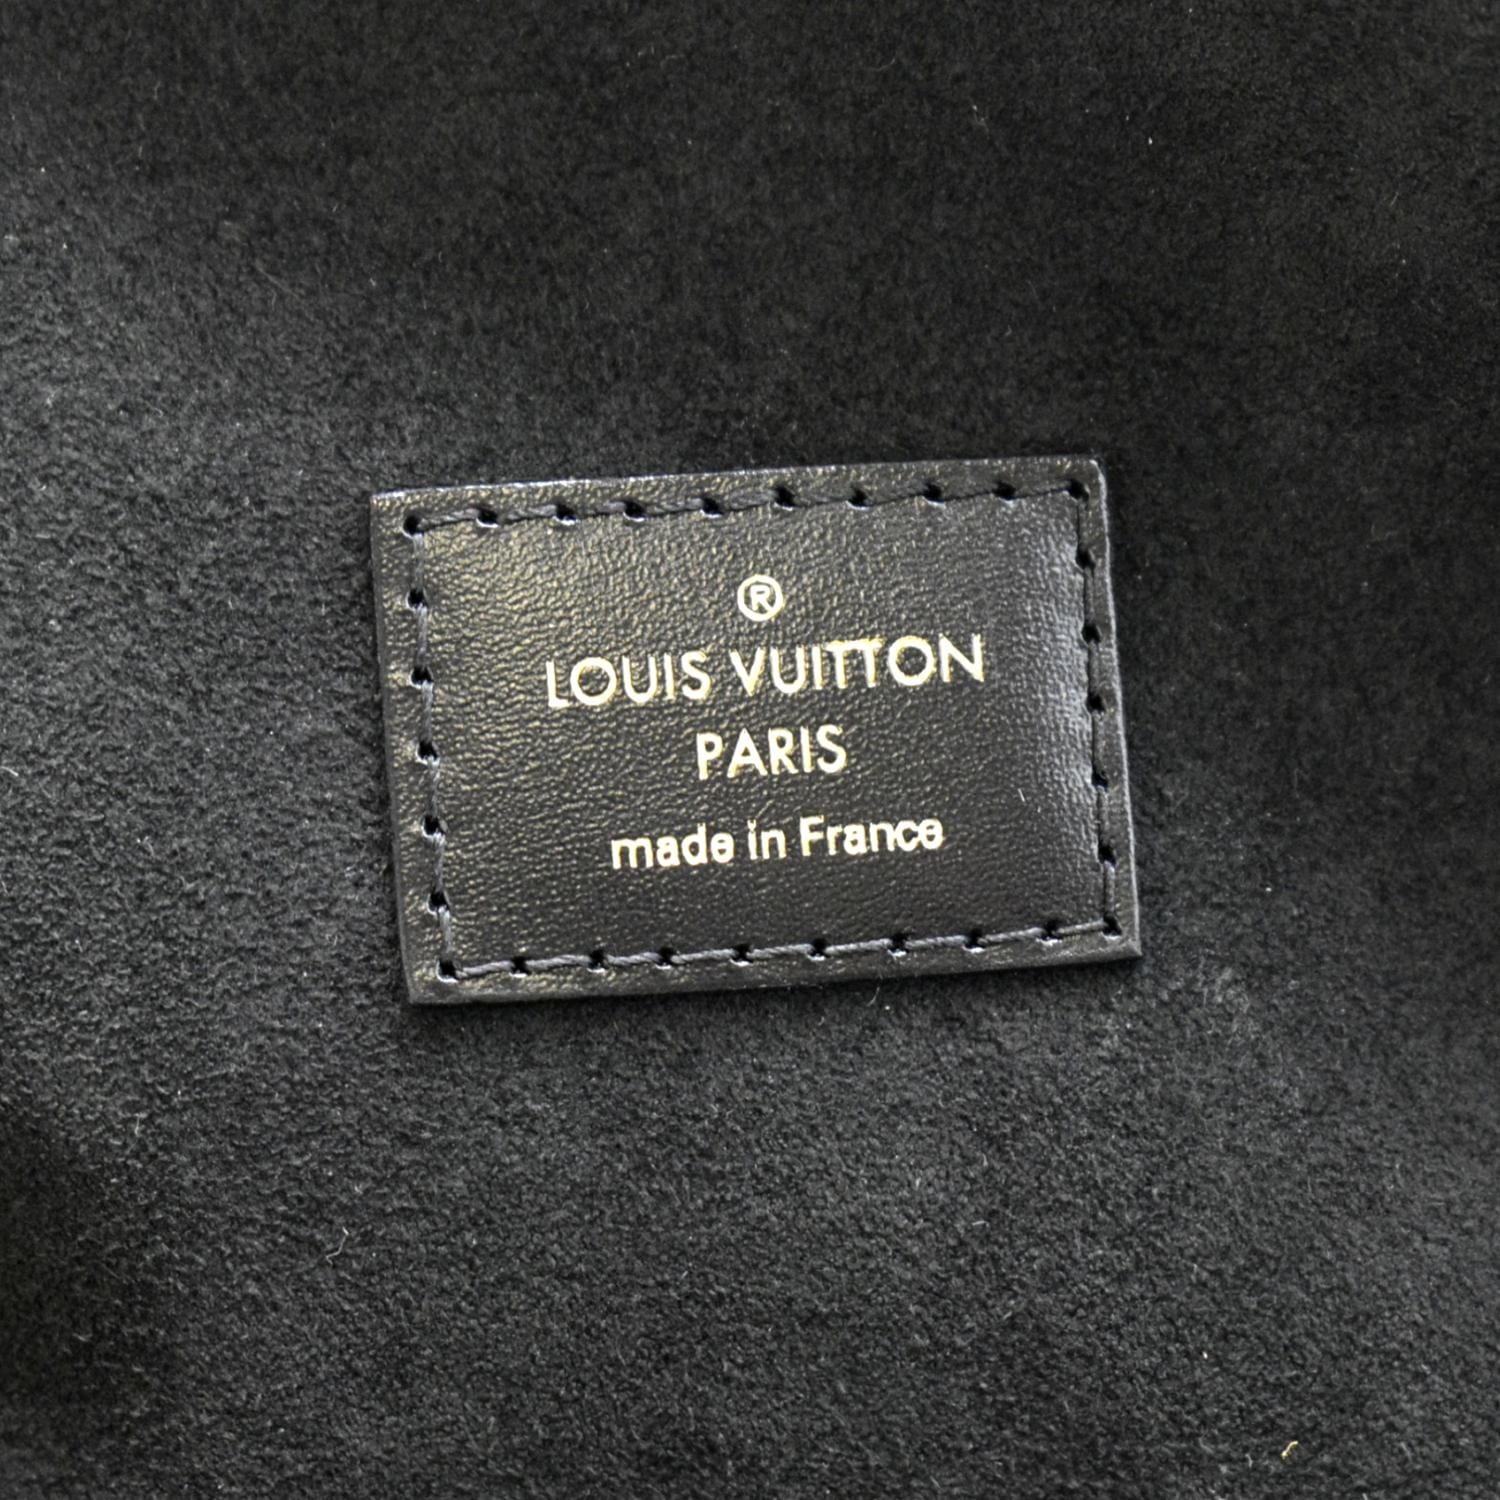 Anyone know where I can get this? : r/Louisvuitton